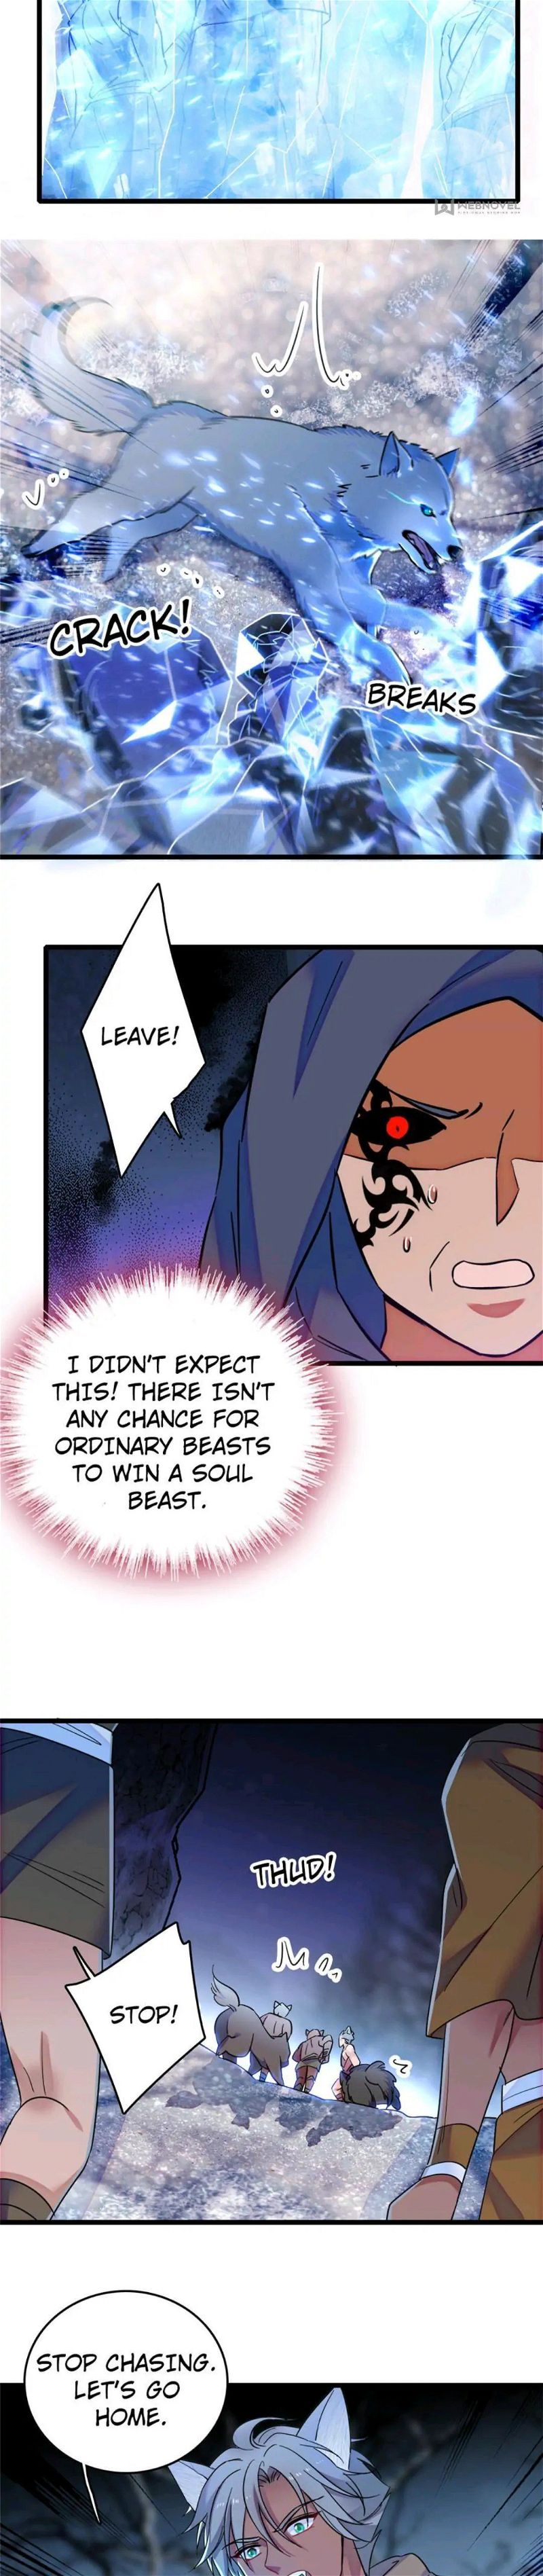 Romance in the Beast World Chapter 61 page 4